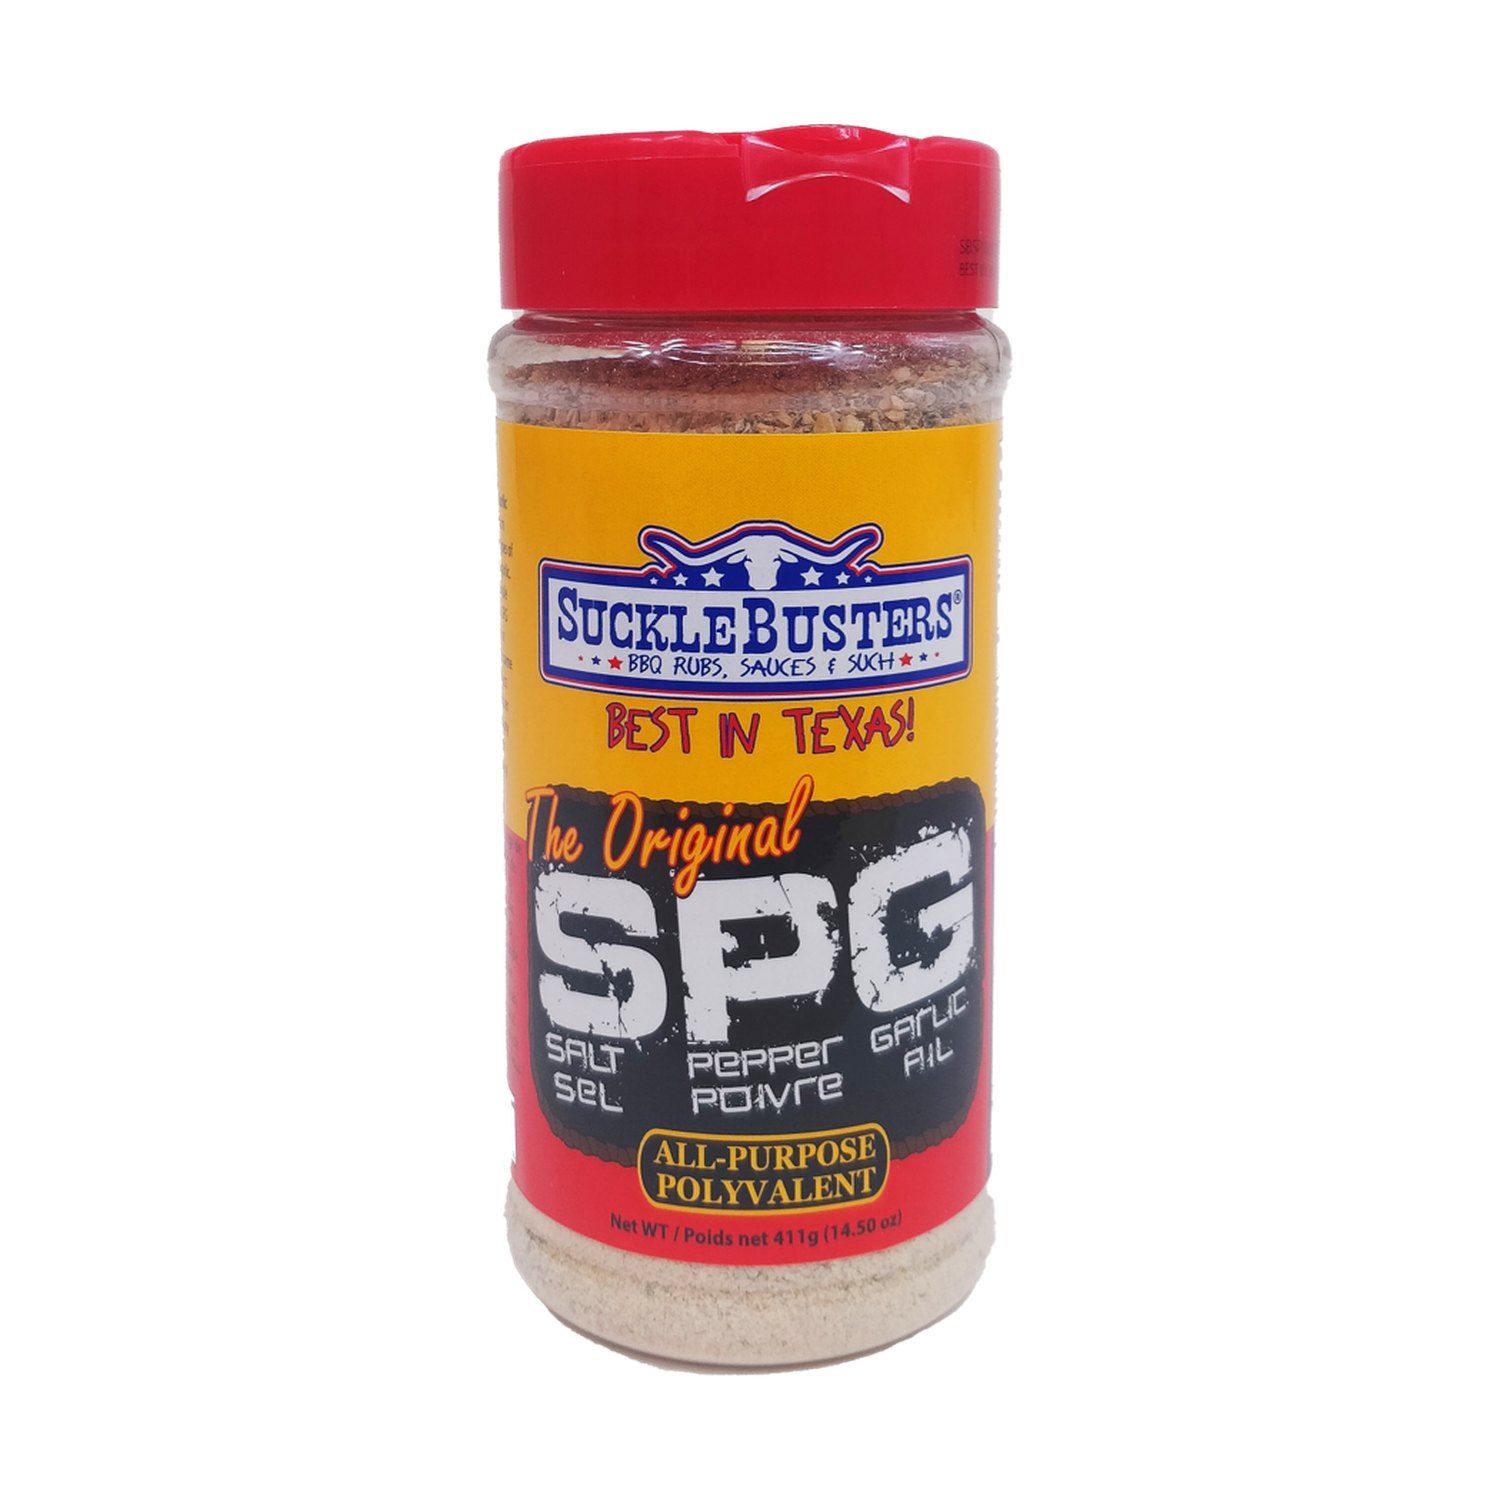 SuckleBusters S.P.G. All Purpose BBQ Rub Suckle Busters Chilliwack BBQ Supply